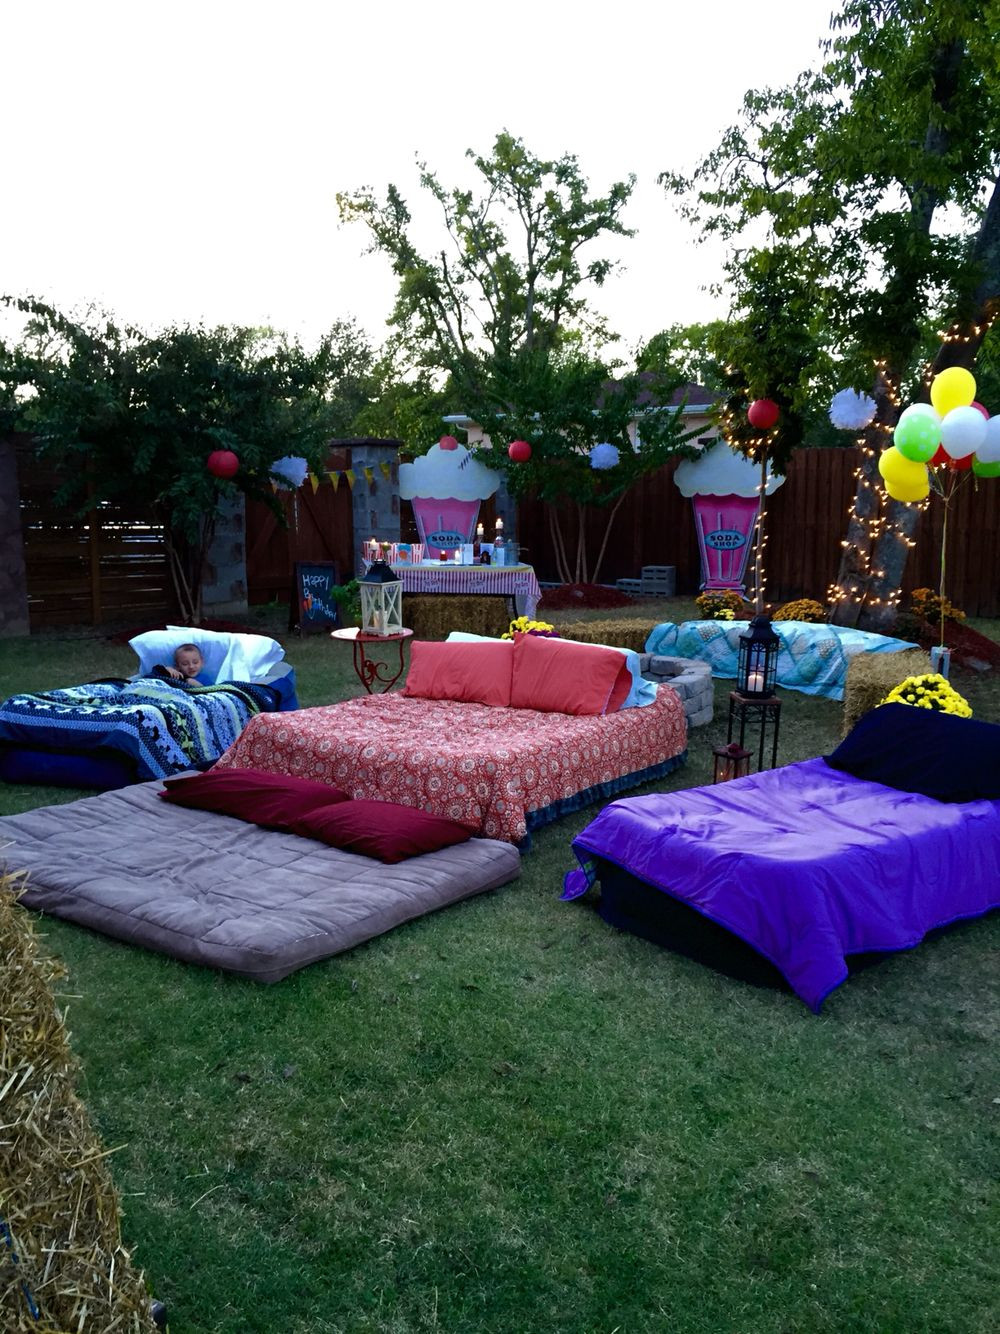 Backyard Movie Night Party Ideas
 Air mattresses for movie night outside